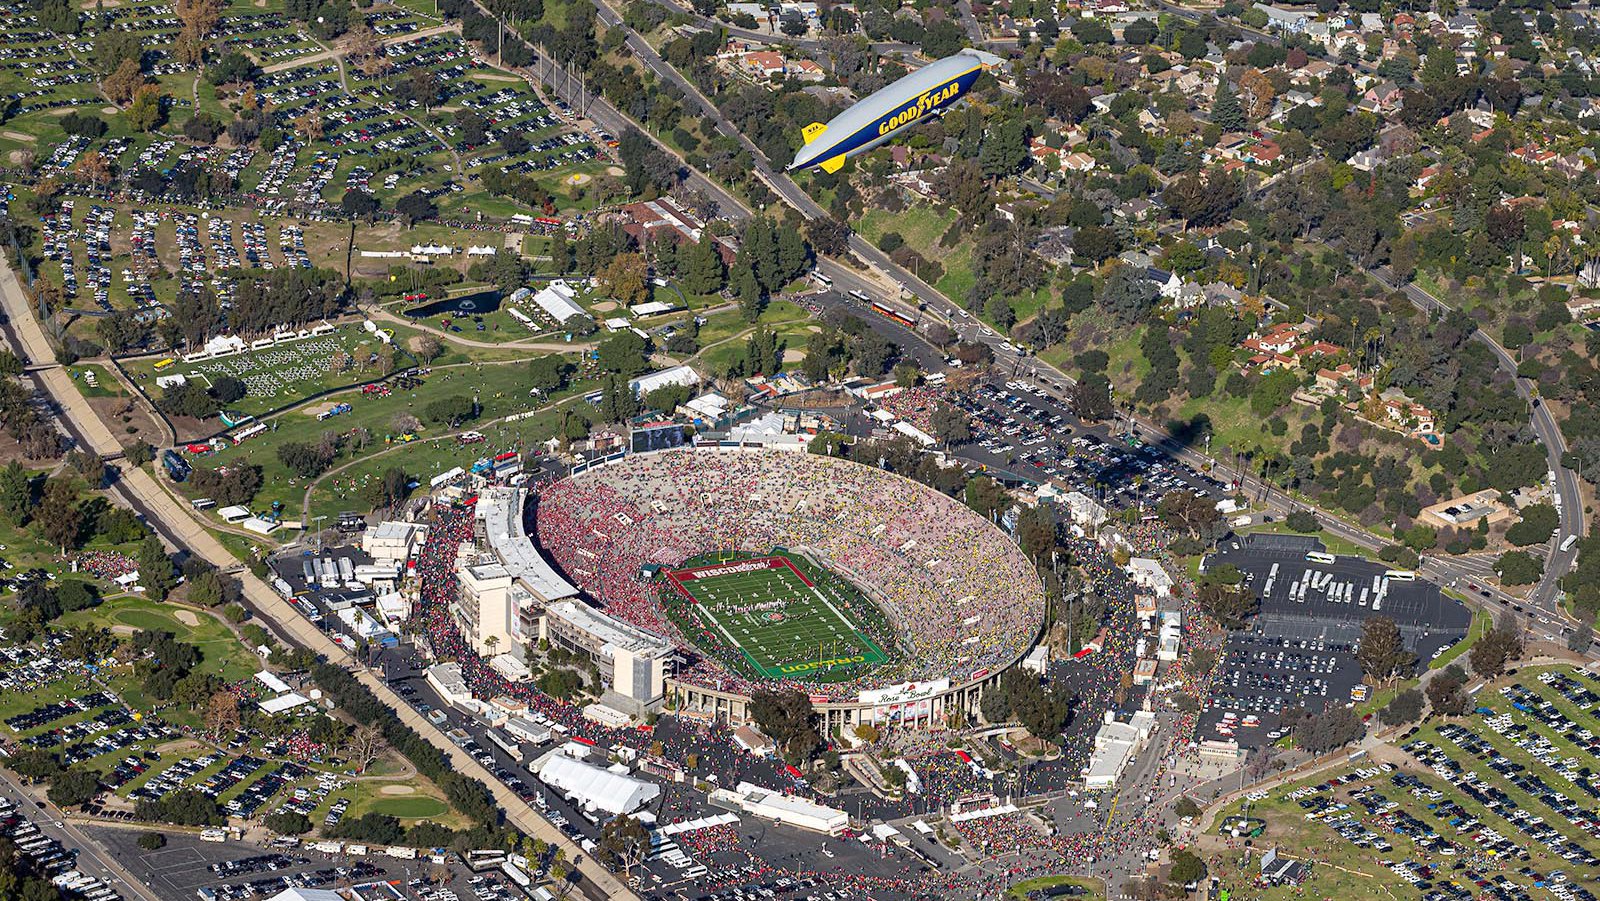 Blog image of the Goodyear Blimp Flying over the Rose Bowl Stadium on New Year's Day 2020 in Pasadena, California